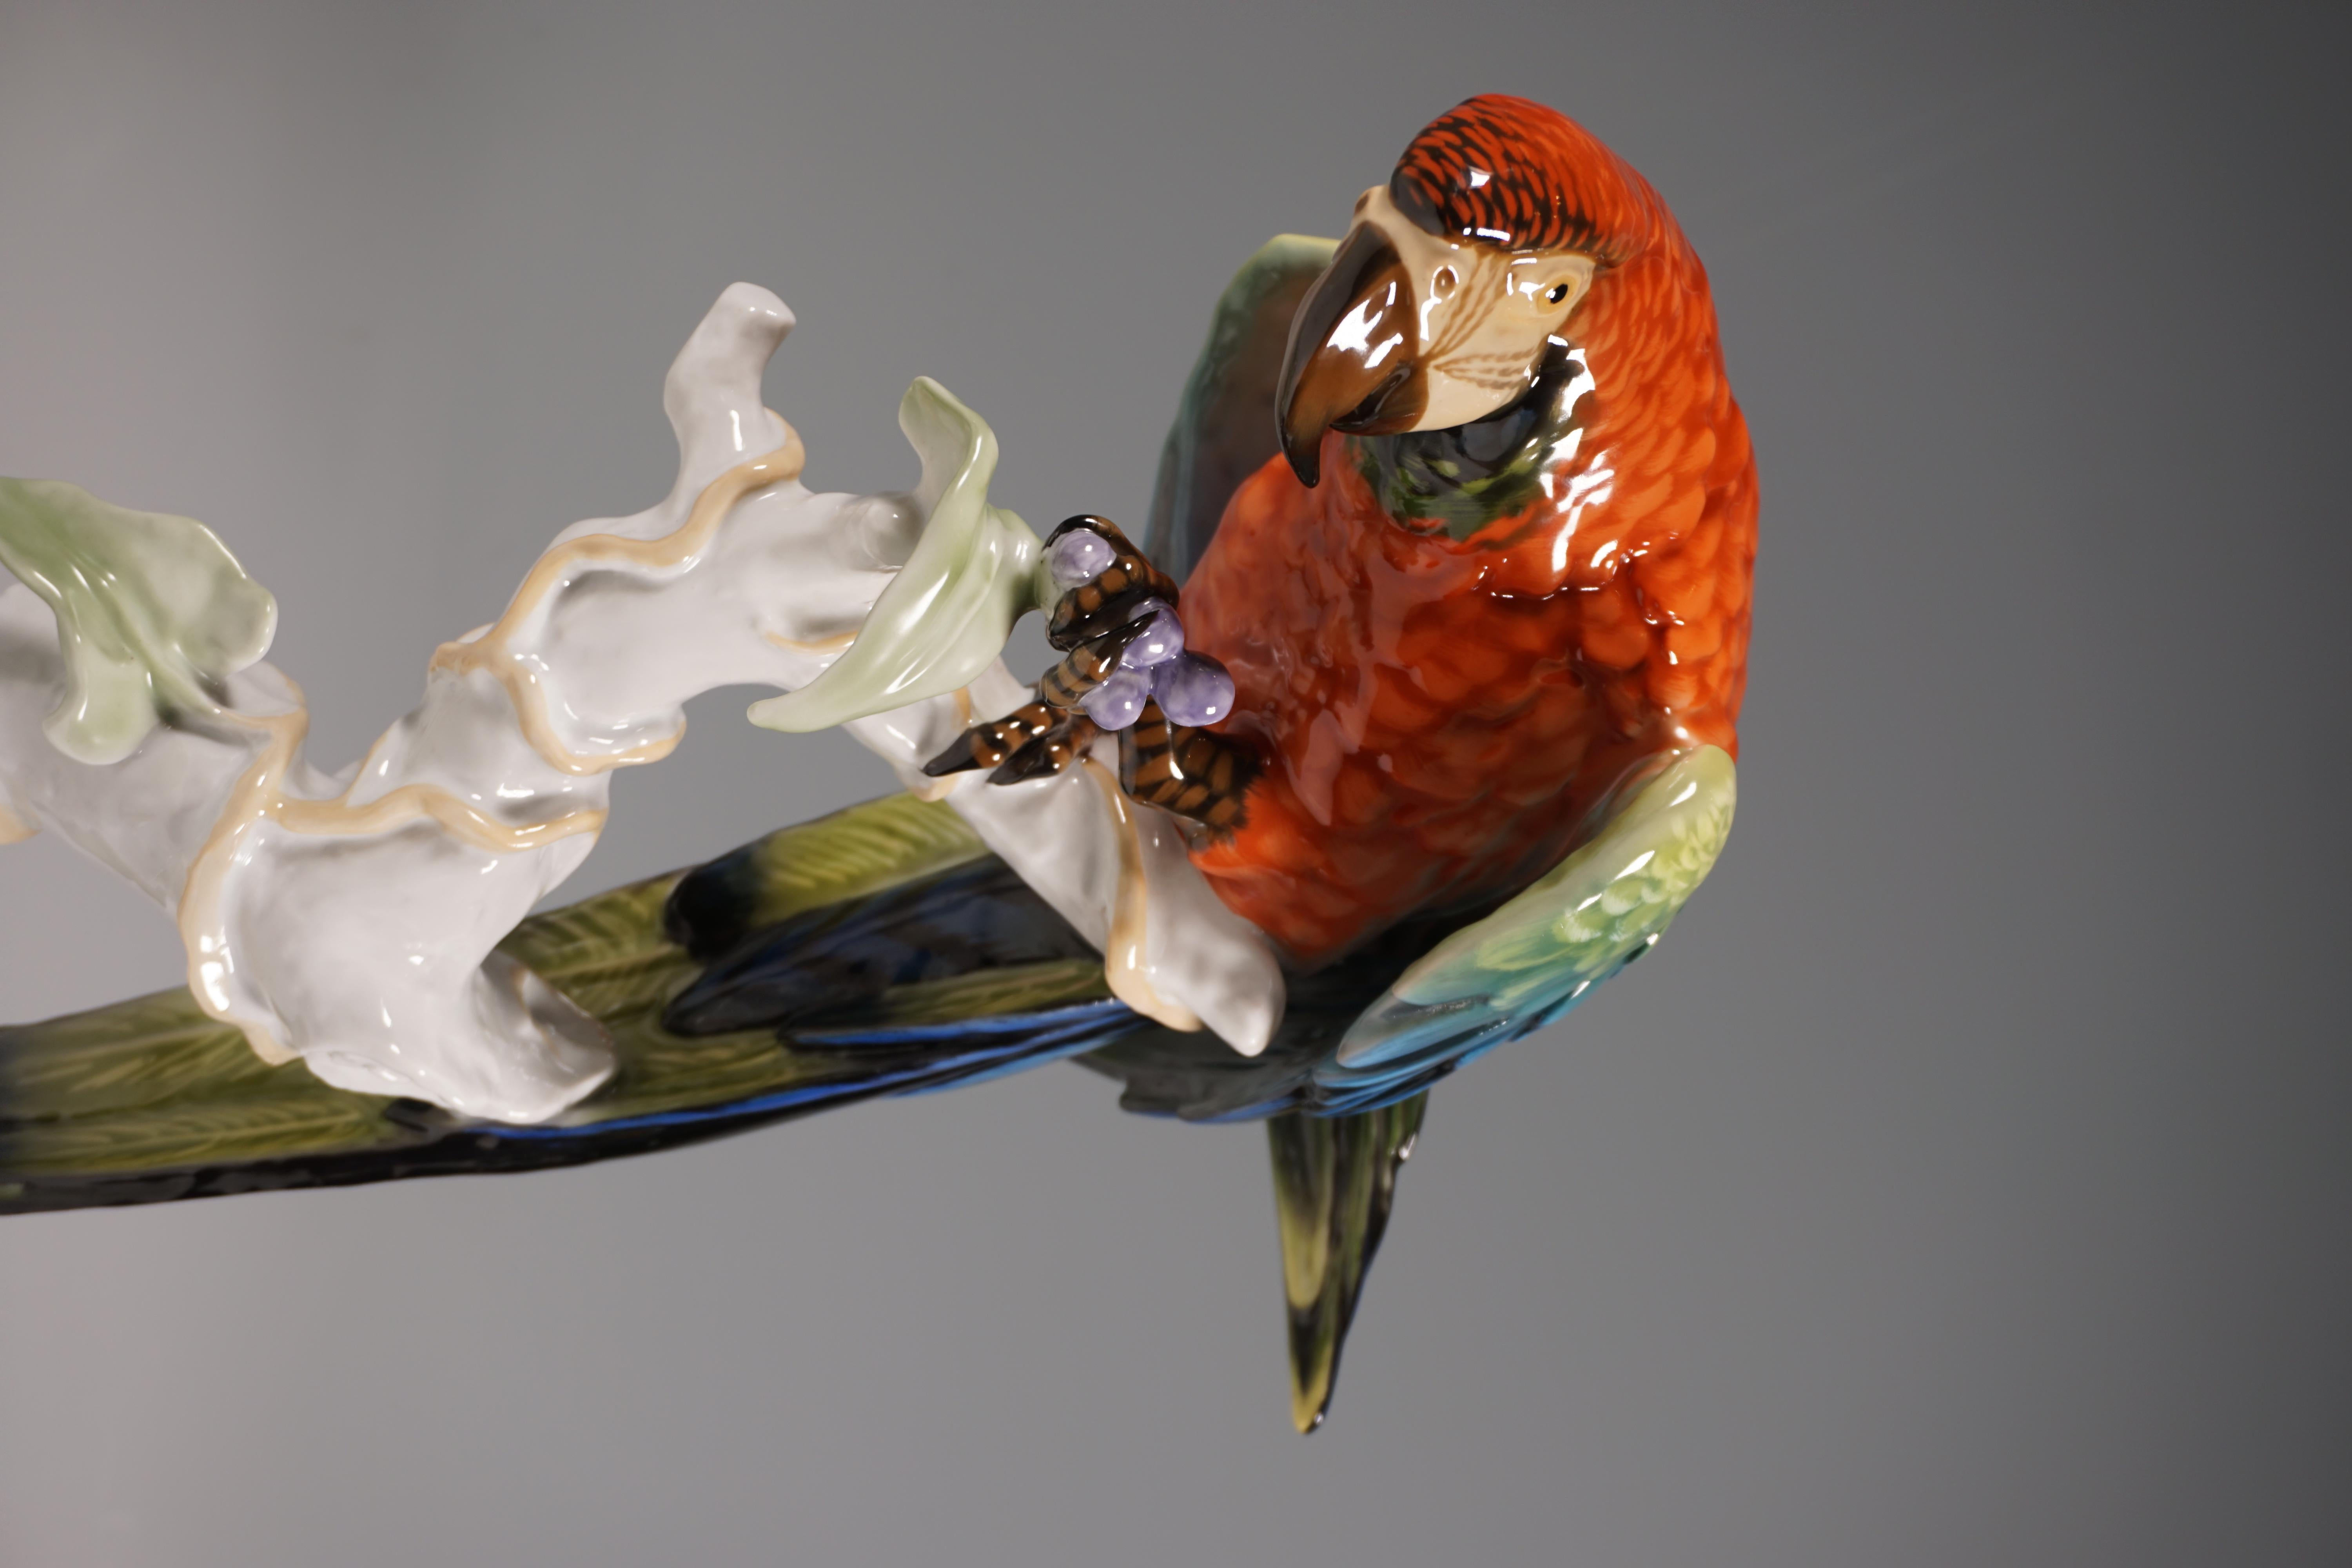 20th Century Large Porcelain Animal Figure, Macaw on a Trunk, Rosenthal Germany, Mid-20th